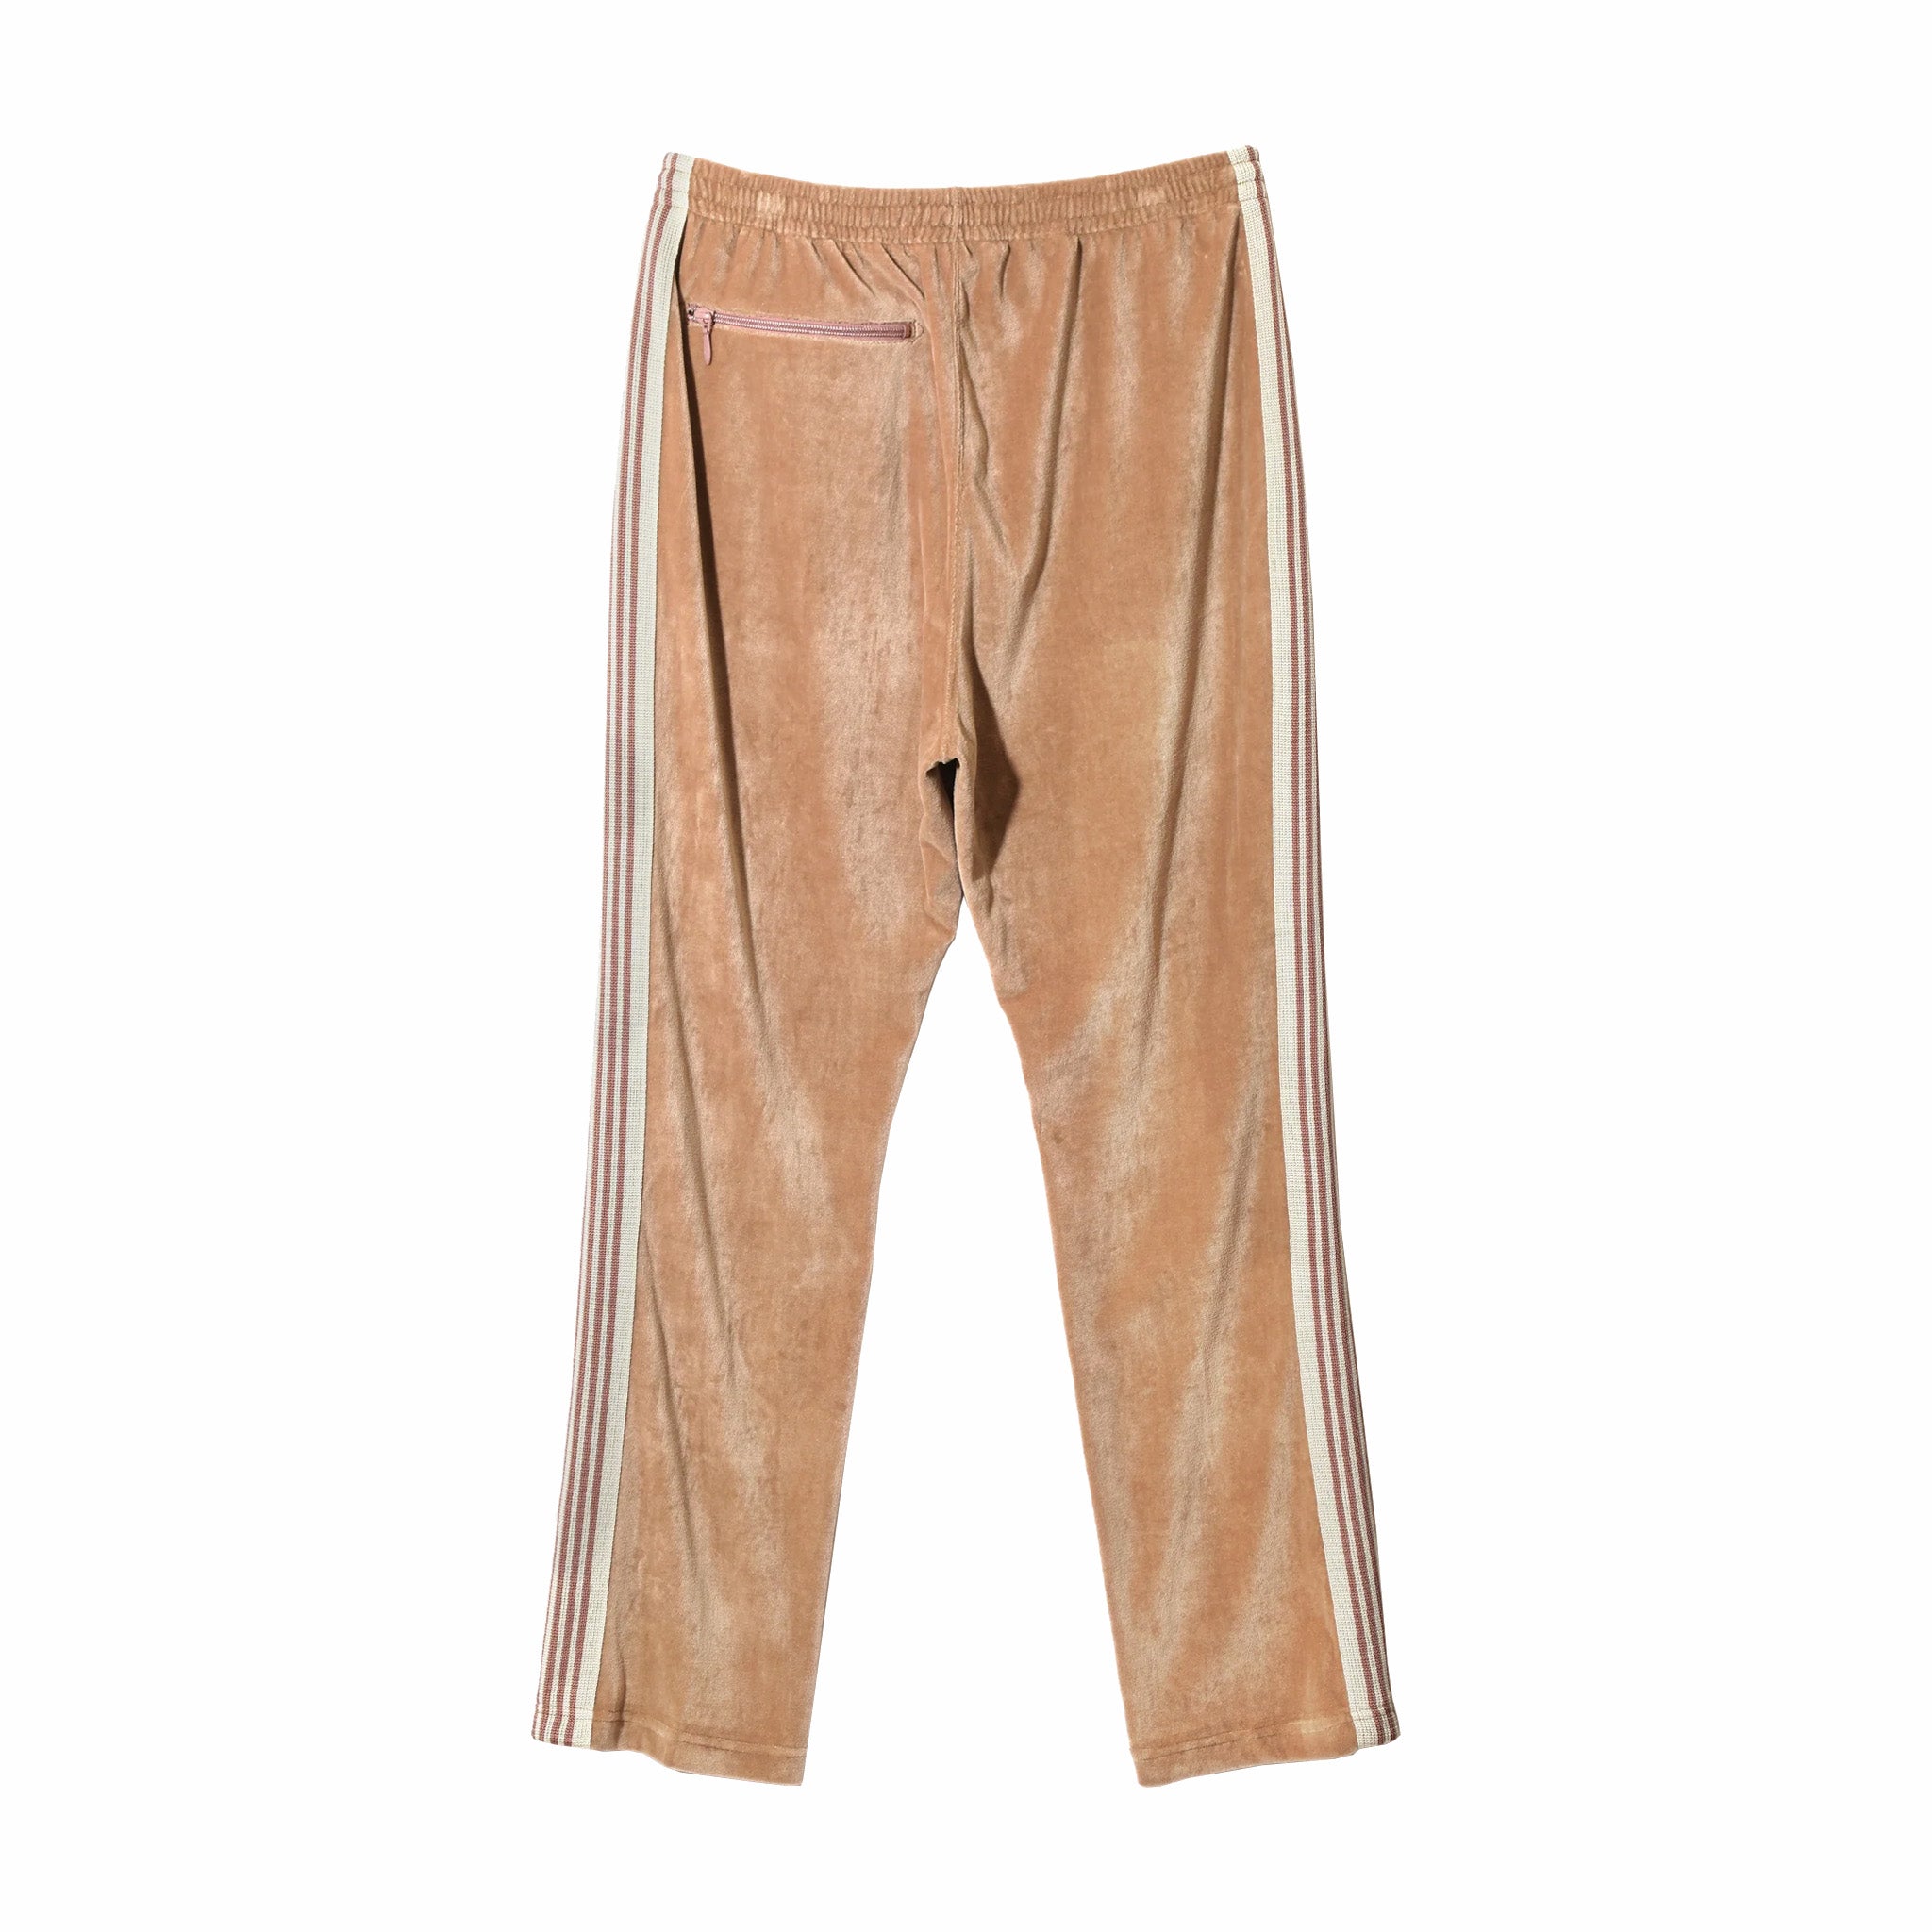 Aghi, Needles Narrow Track Pant - C/PE Velour (Old Rose)